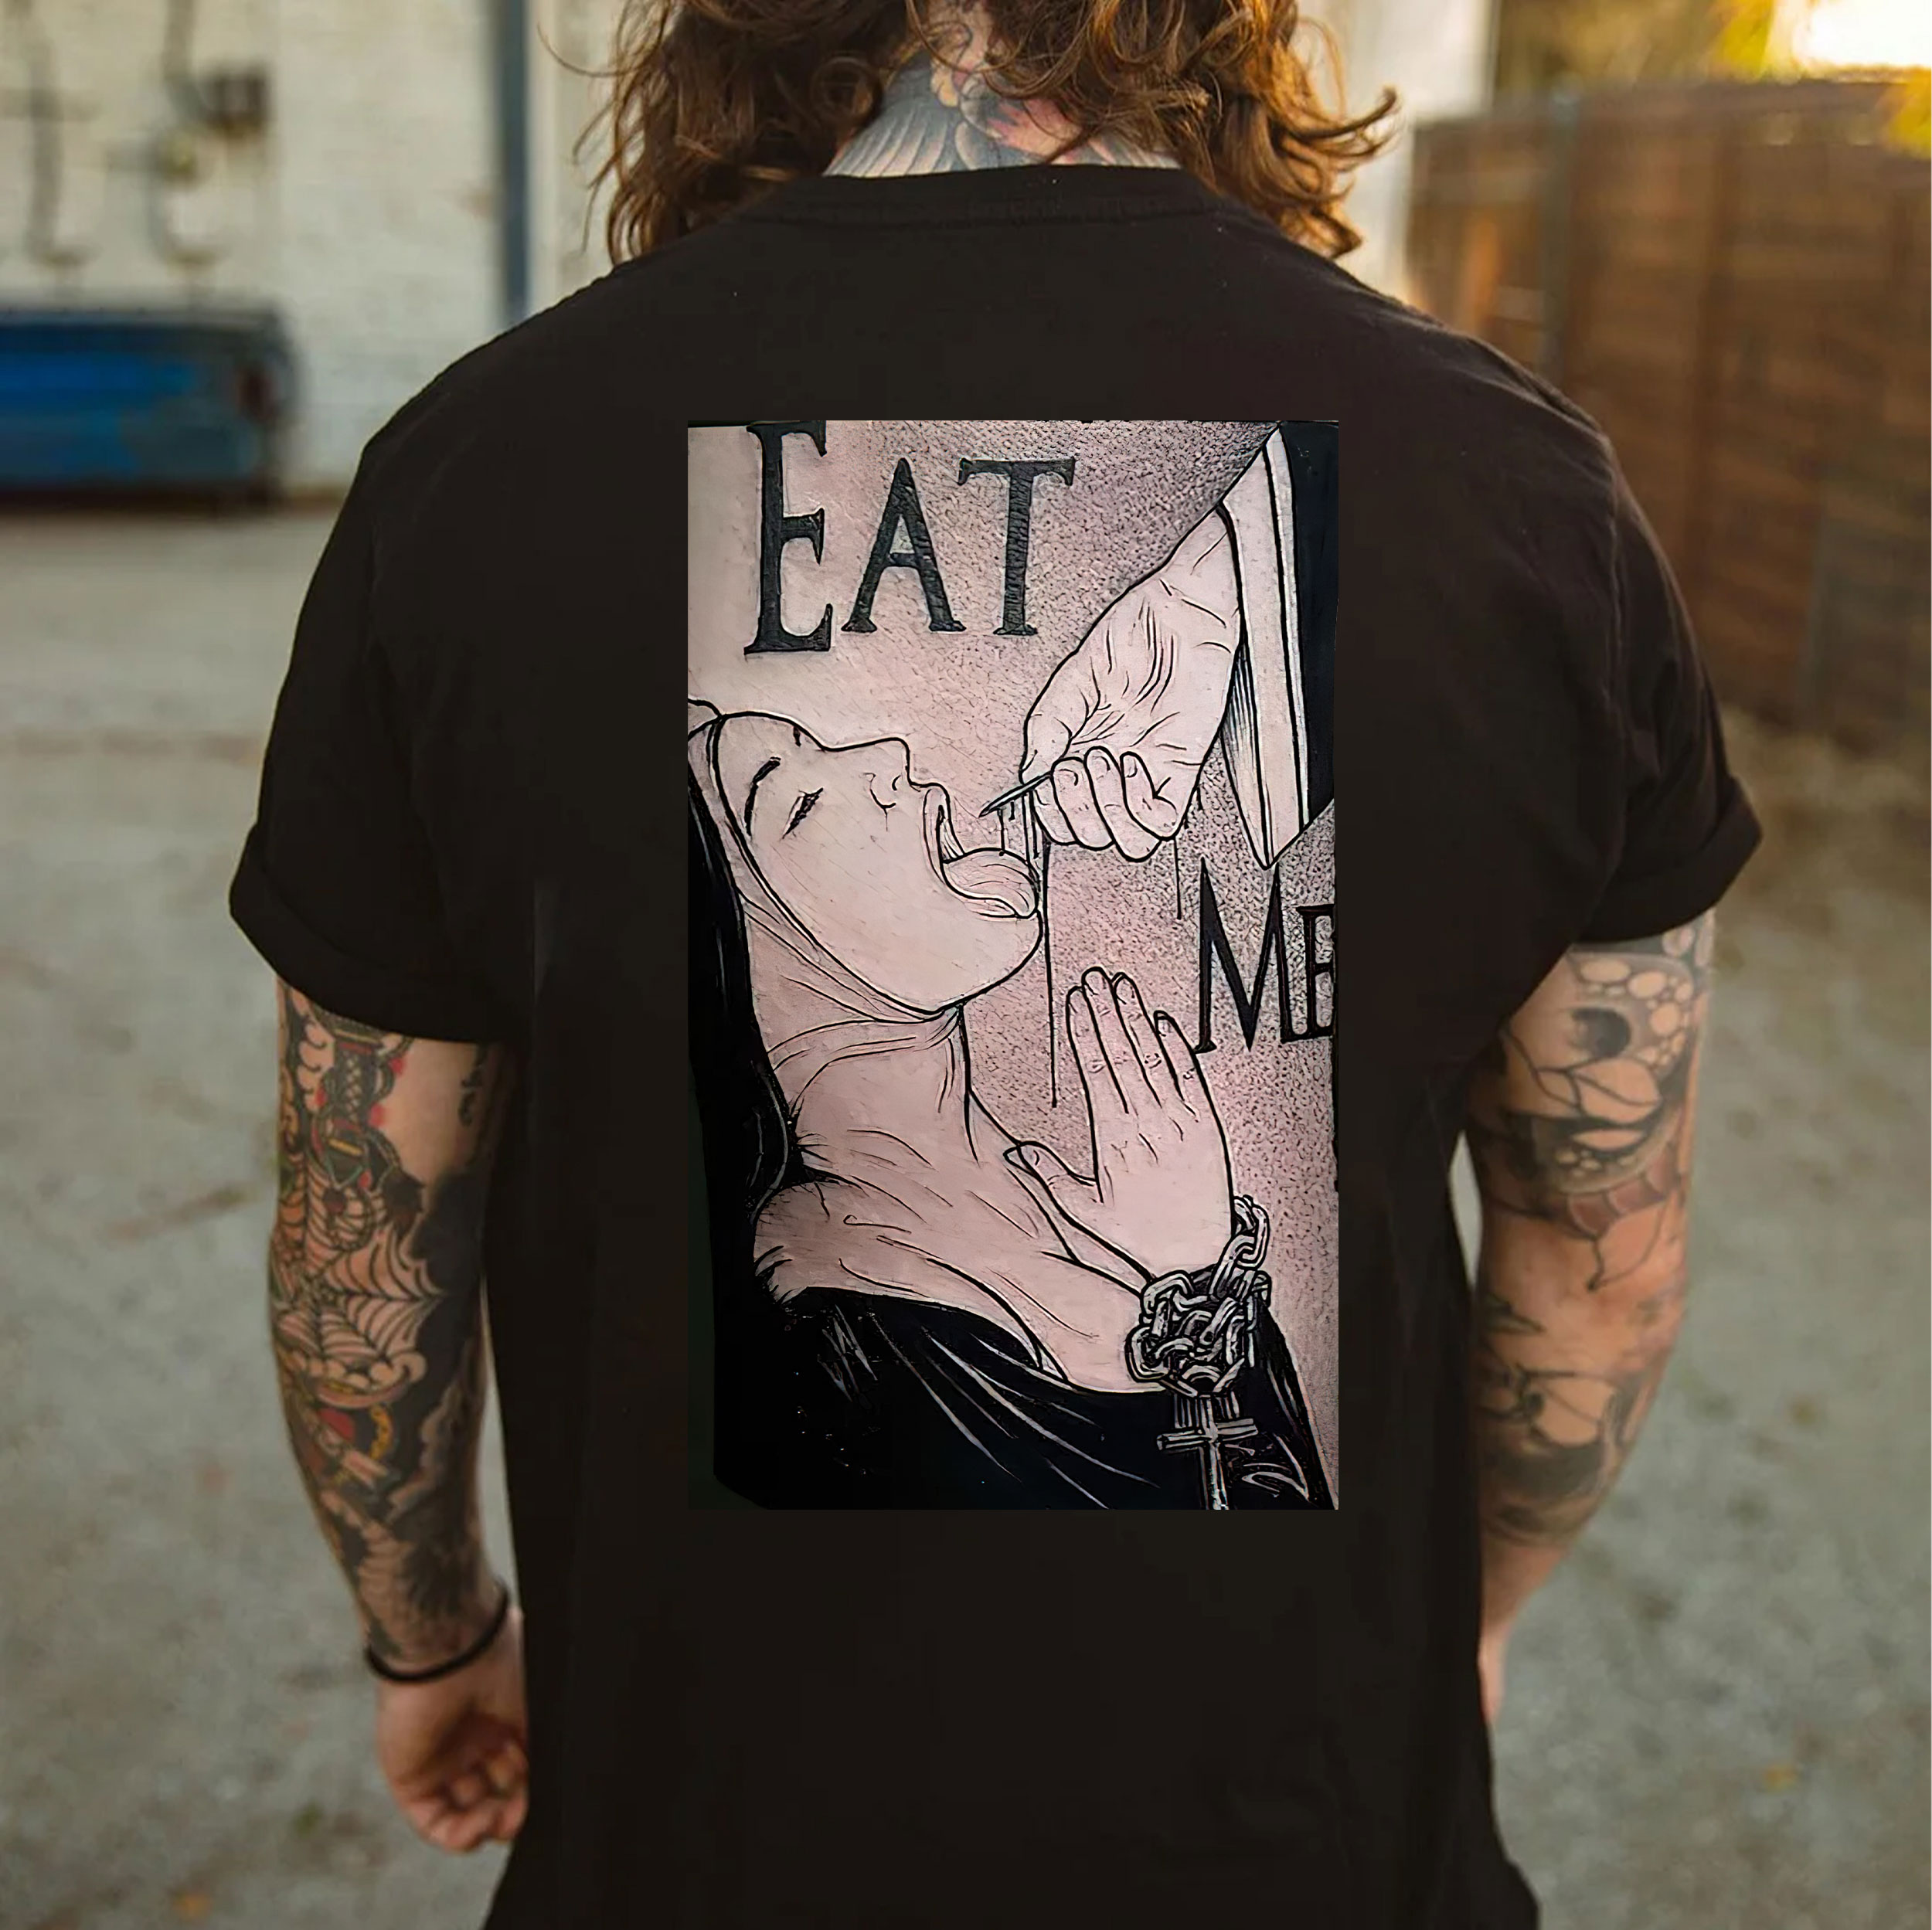 EAT ME Sexy Lady with Dirty Item Black Print T-shirt